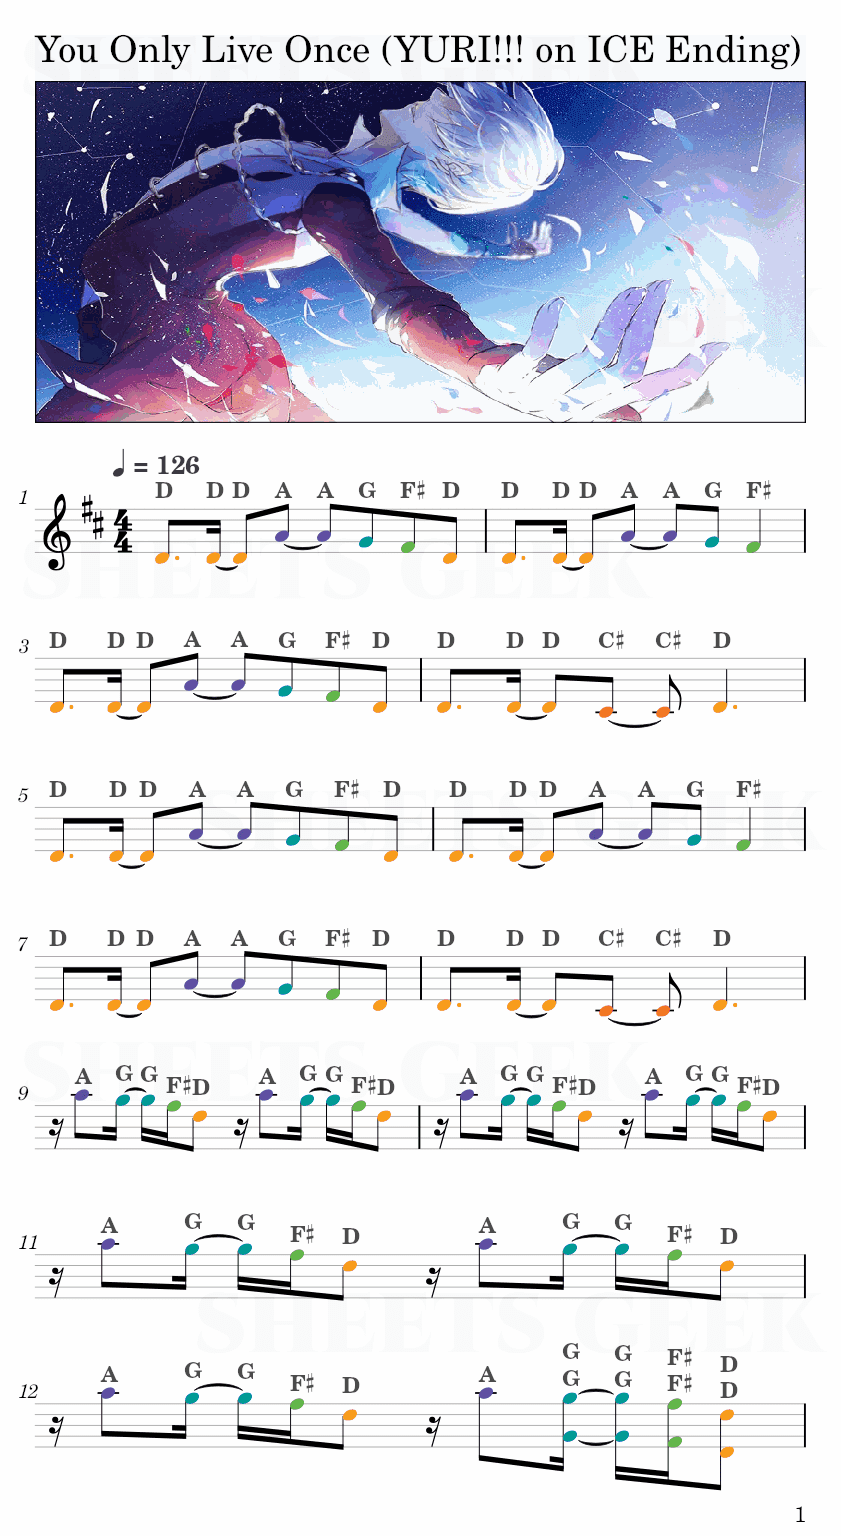 Wataru Hatano - You Only Live Once (YURI!!! on ICE Ending) Easy Sheet Music Free for piano, keyboard, flute, violin, sax, cello page 1